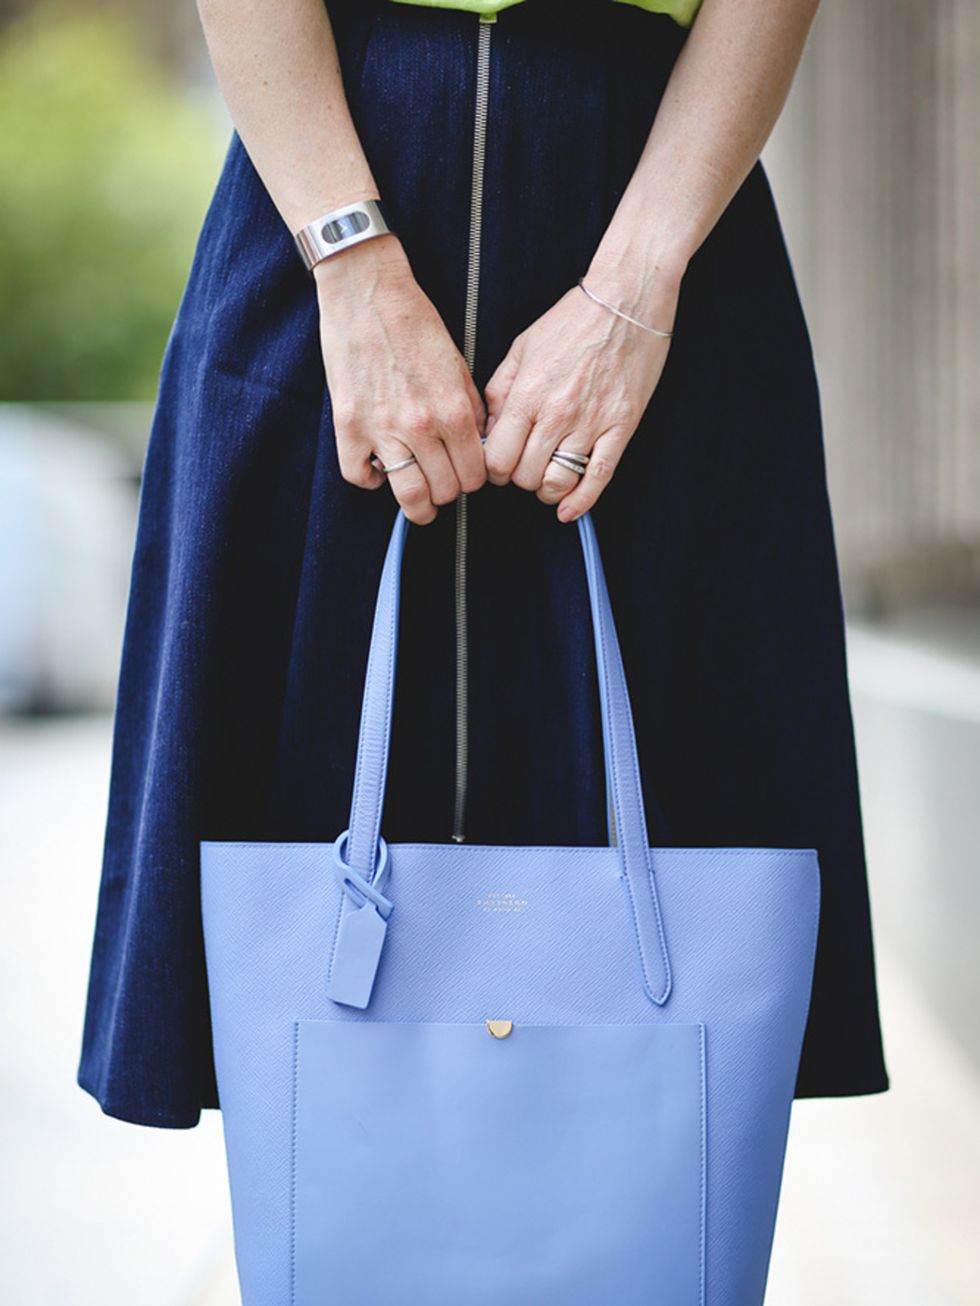 <p>Lorraine Candy, Editor-in-Chief</p>

<p>Whistles T-shirt and skirt, adidas trainers, Smythson bag and Gucci watch</p>